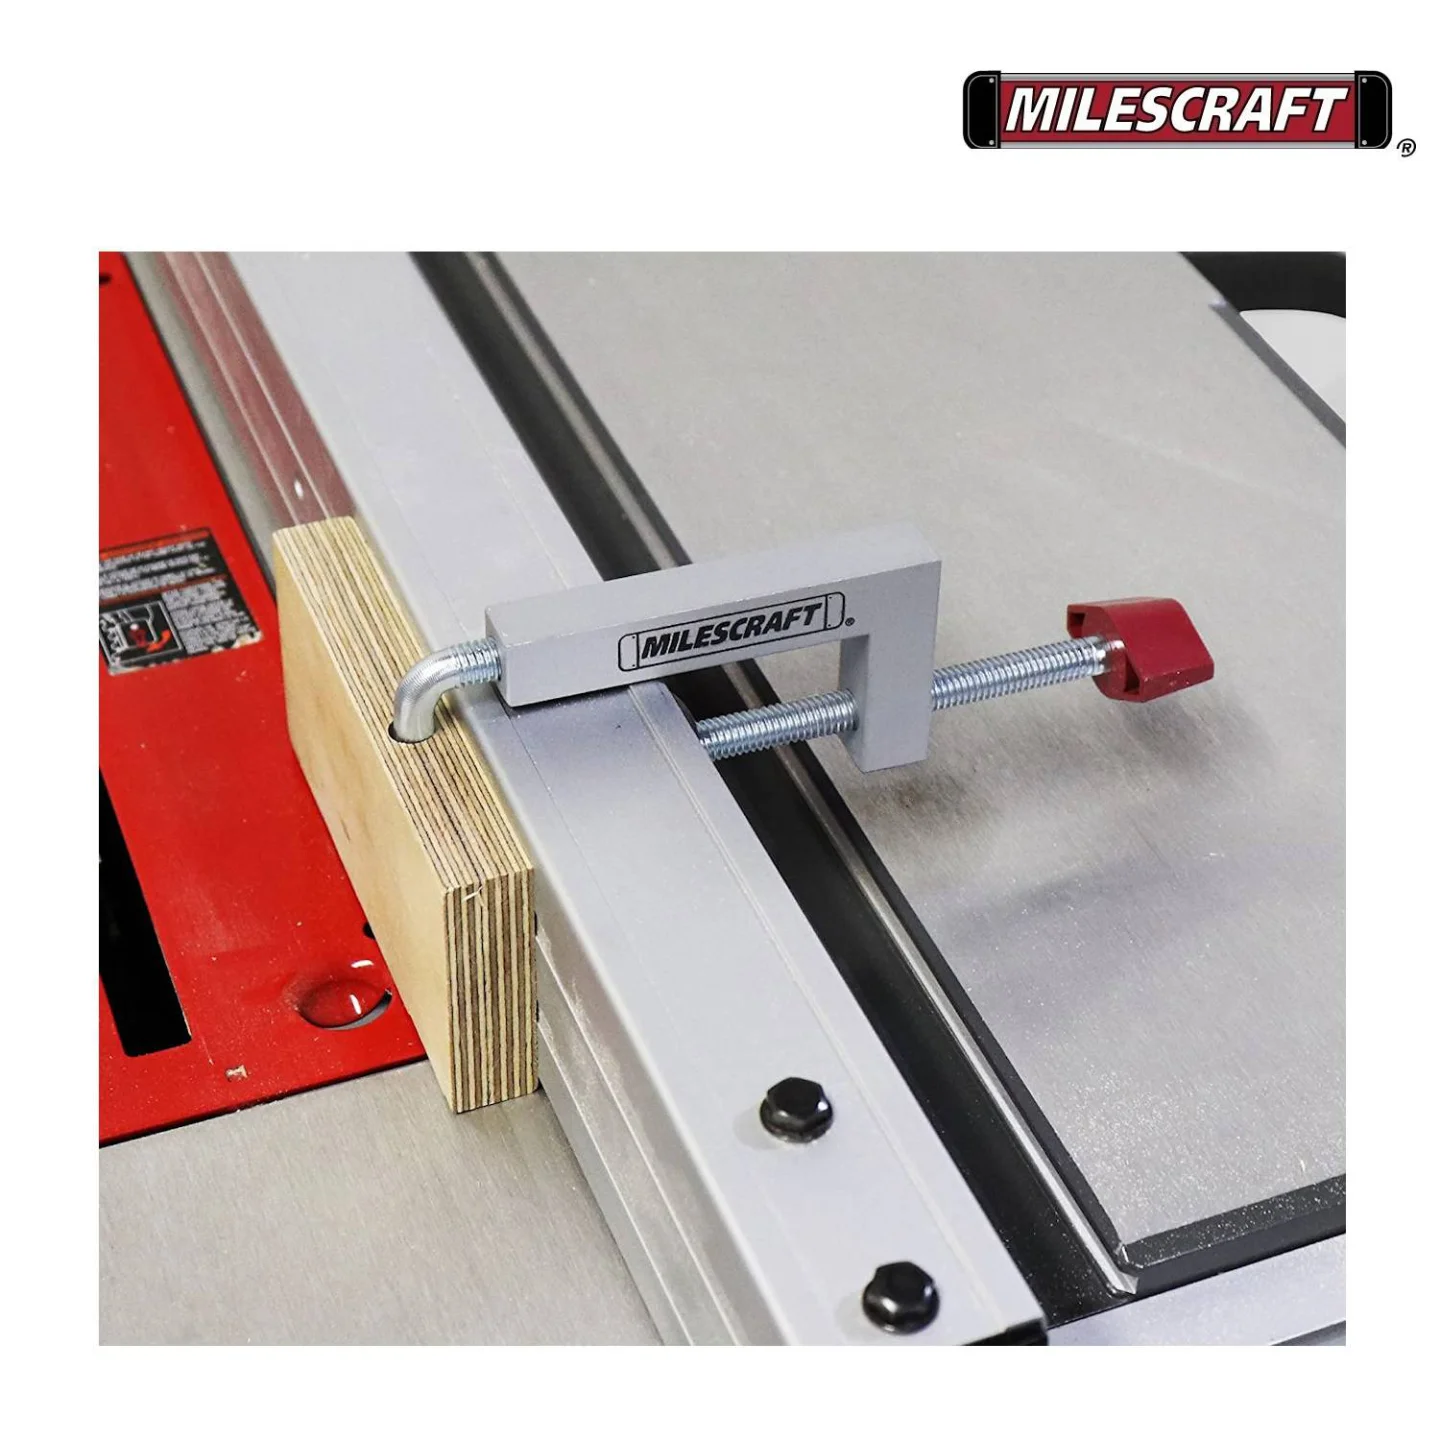 Milescraft-fence-clamps-4009.